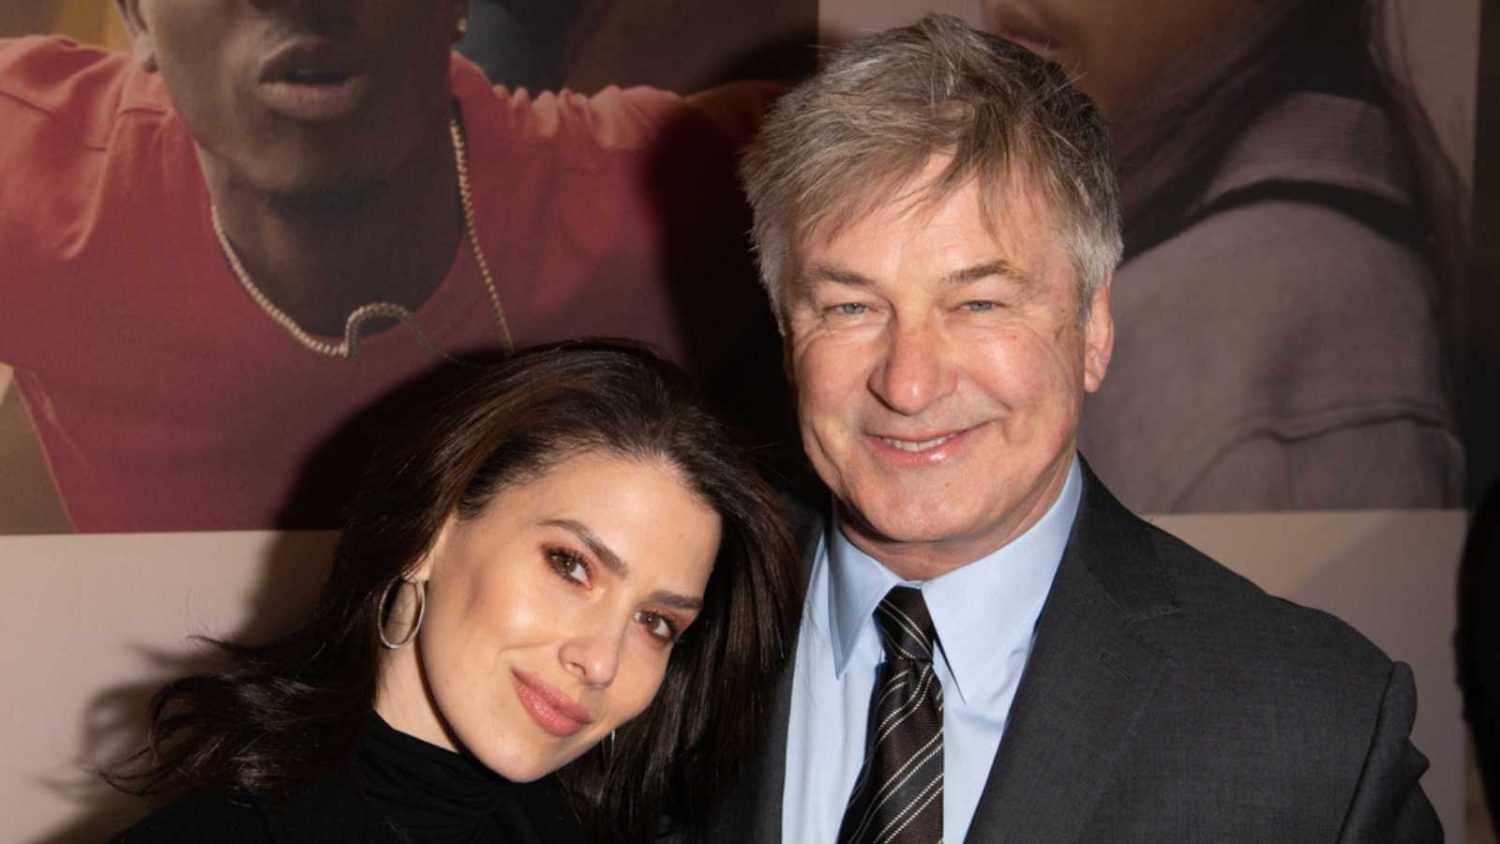 NEW YORK, NY - FEBRUARY 20: Hilaria Baldwin and Alec Baldwin attend opening night of "West Side Story" on Broadway at The Broadway Theatre on February 20, 2020 in New York City.